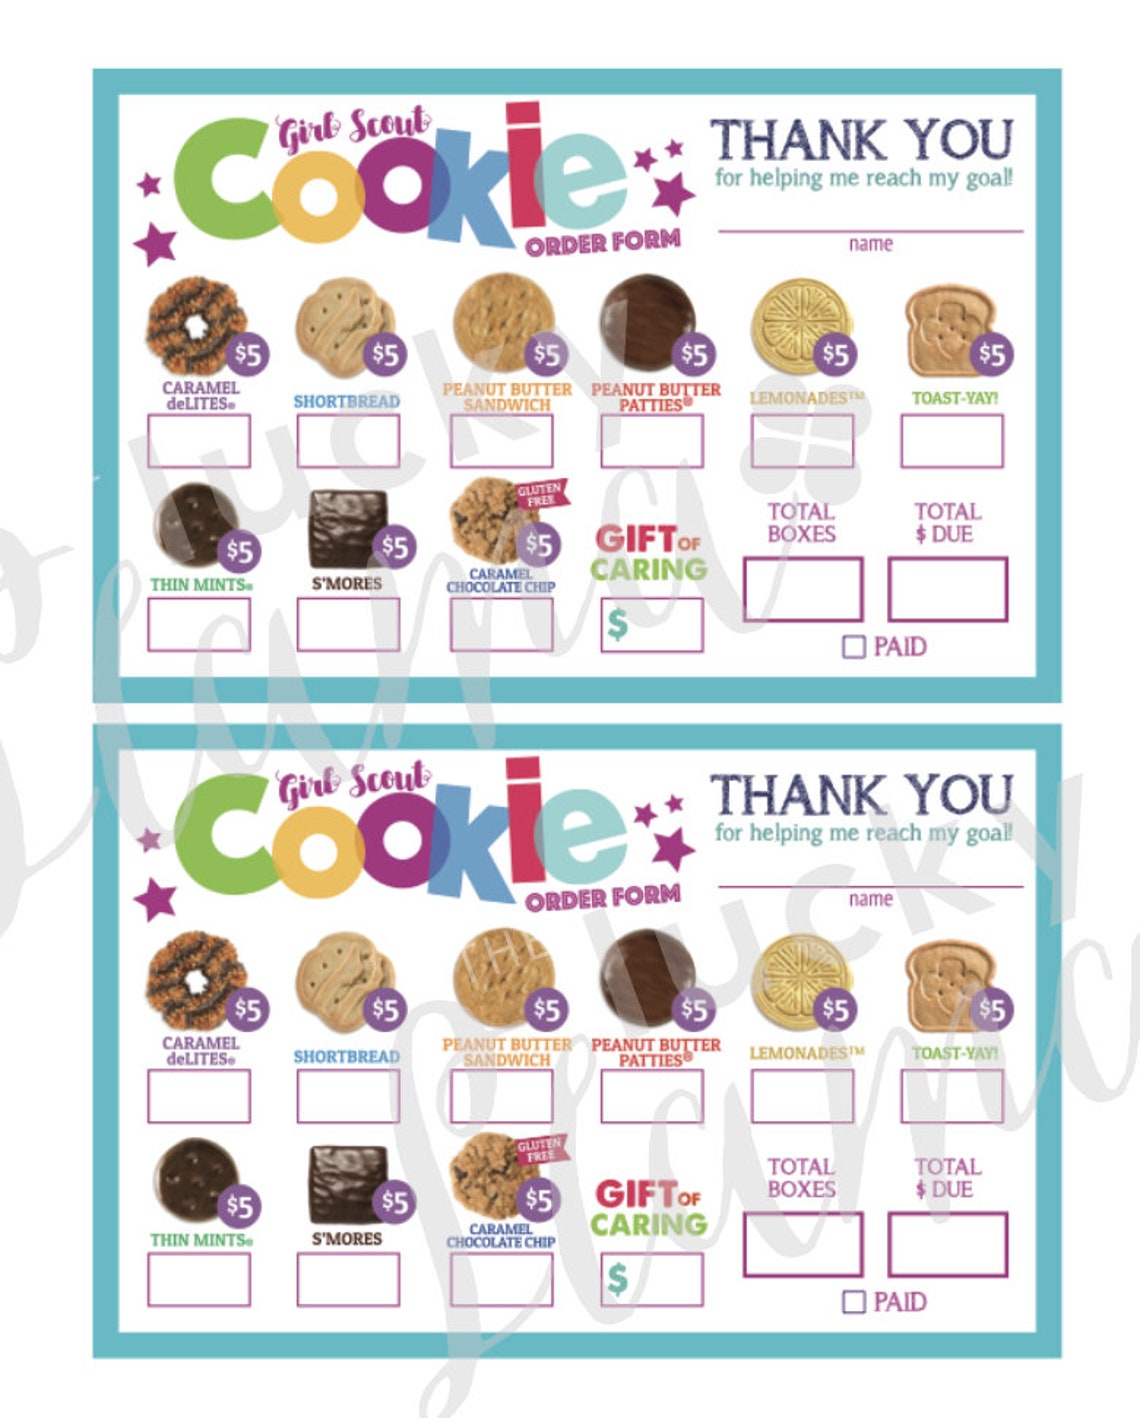 ABC Girl Scout Cookie Order Form Gift of Caring Donation Etsy